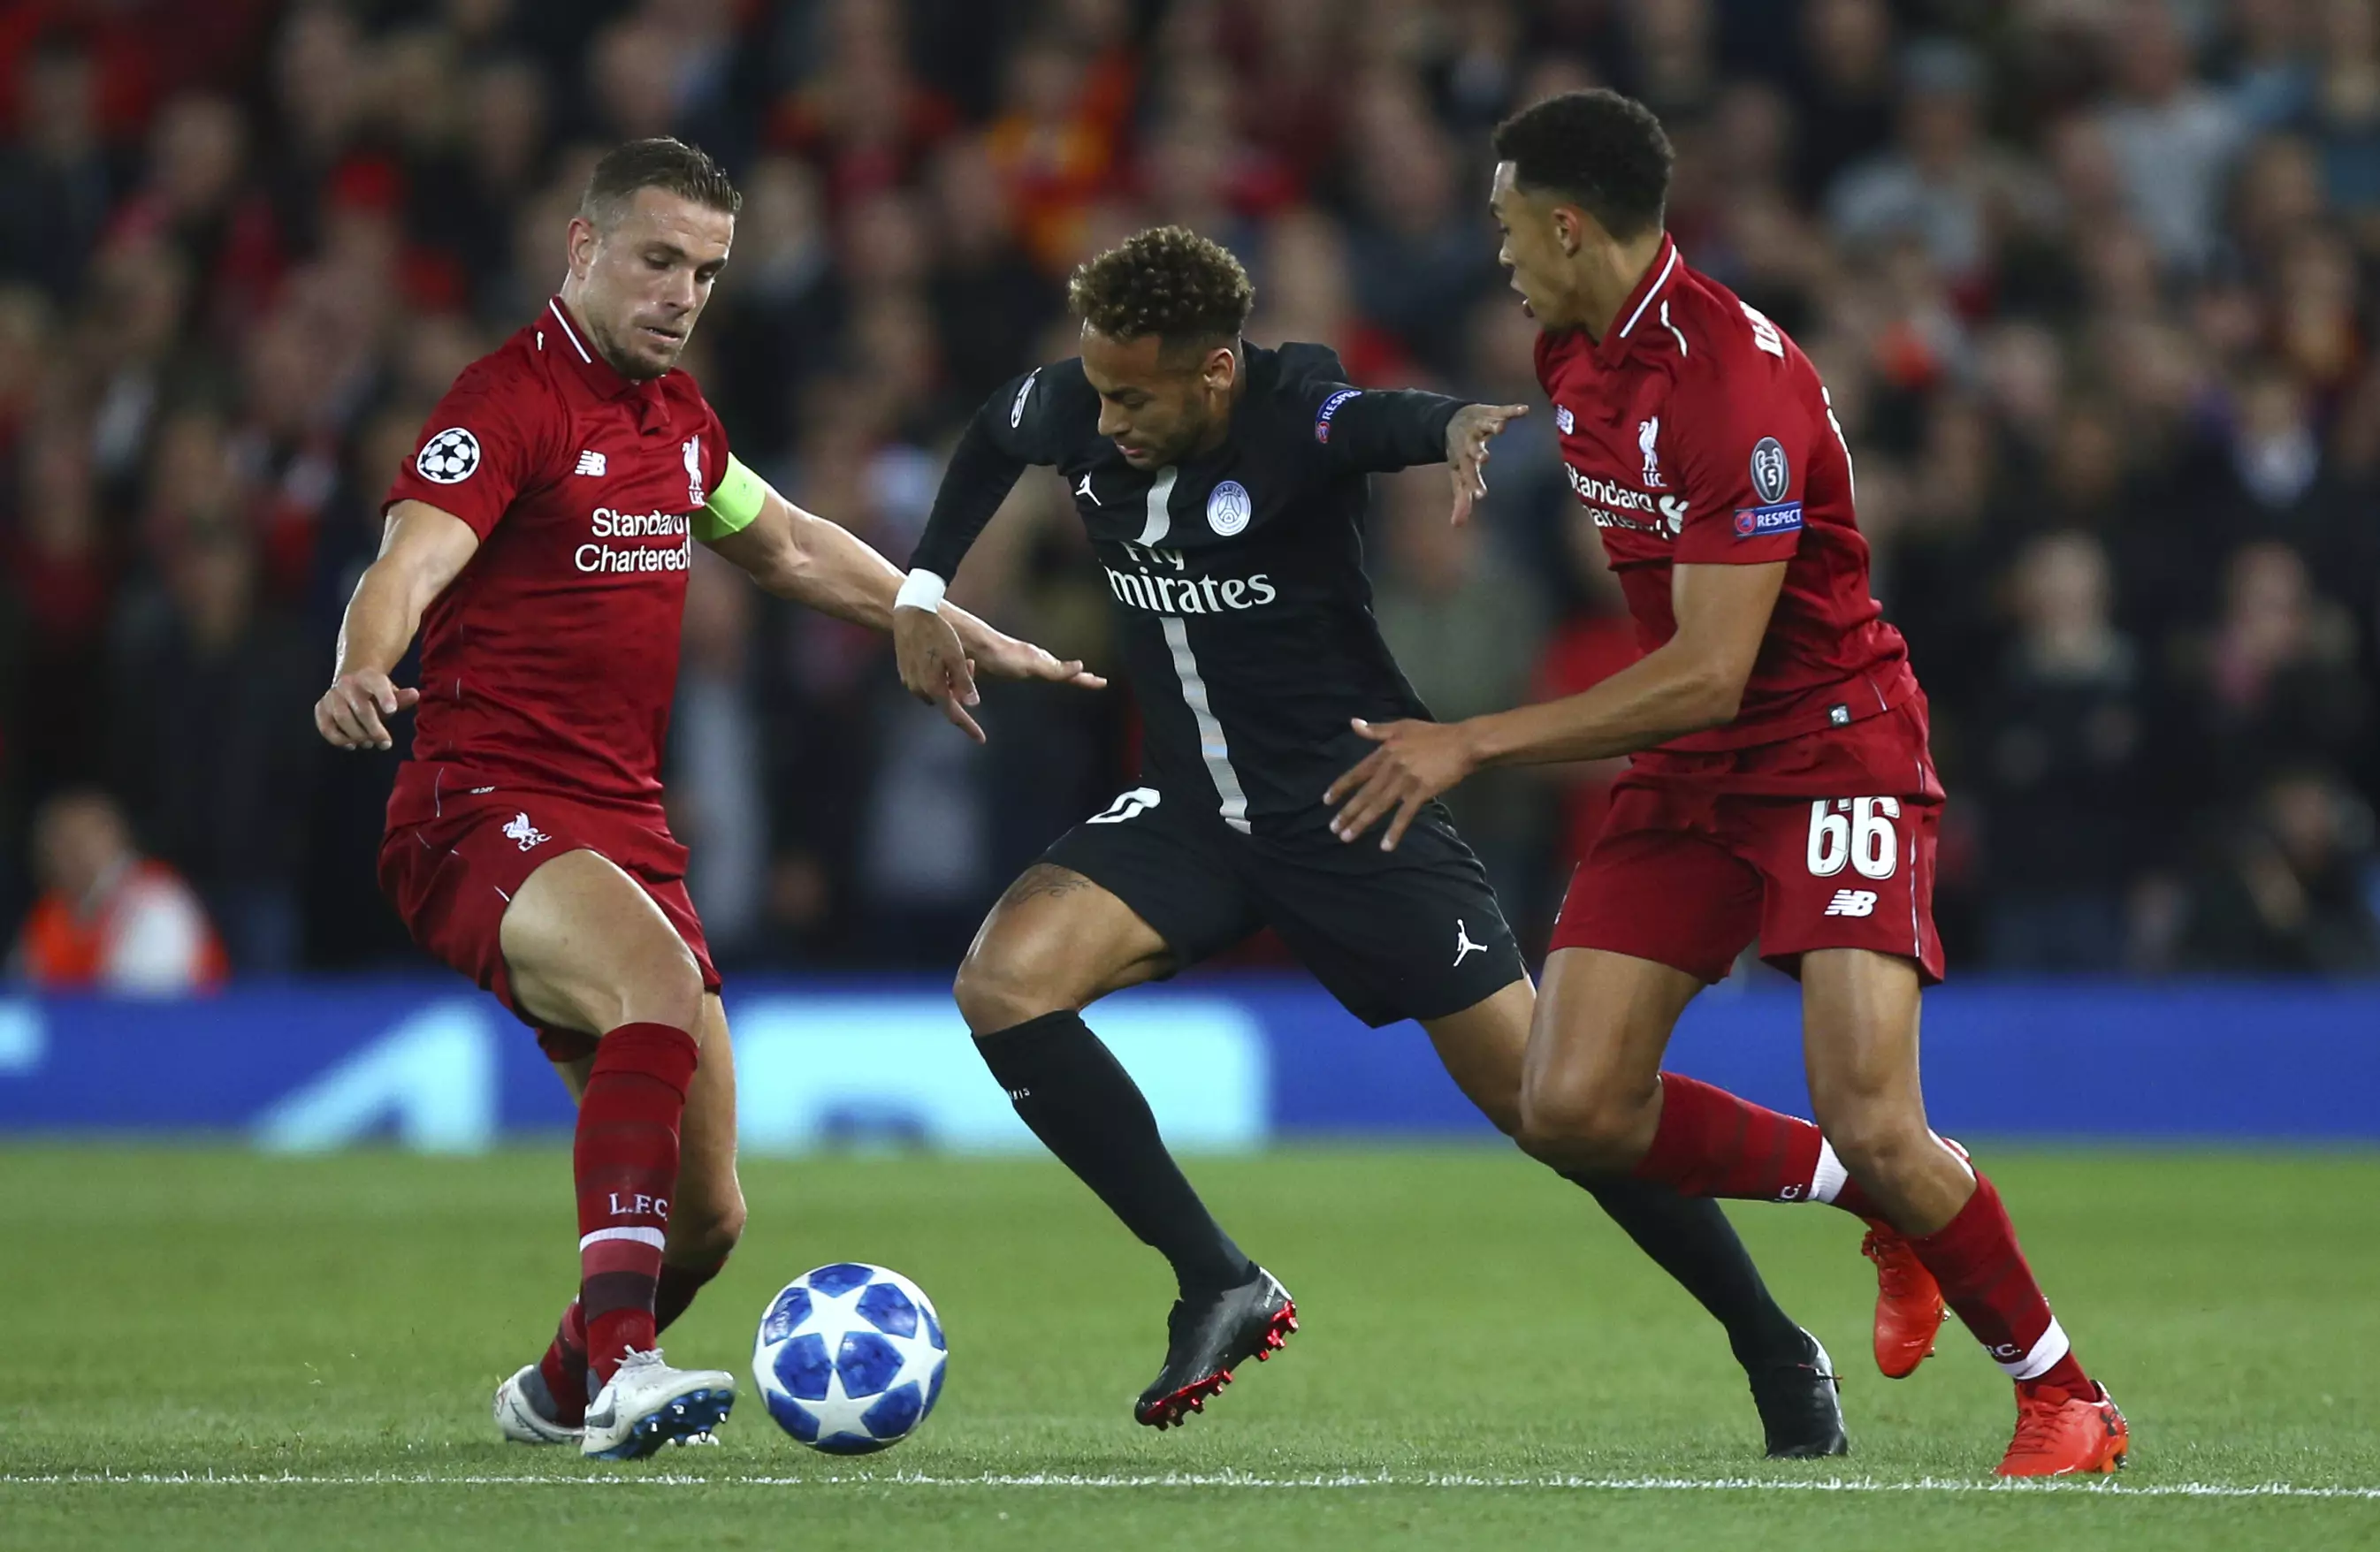 Henderson was part of a brilliant effort to keep Neymar quiet. Image: PA Images